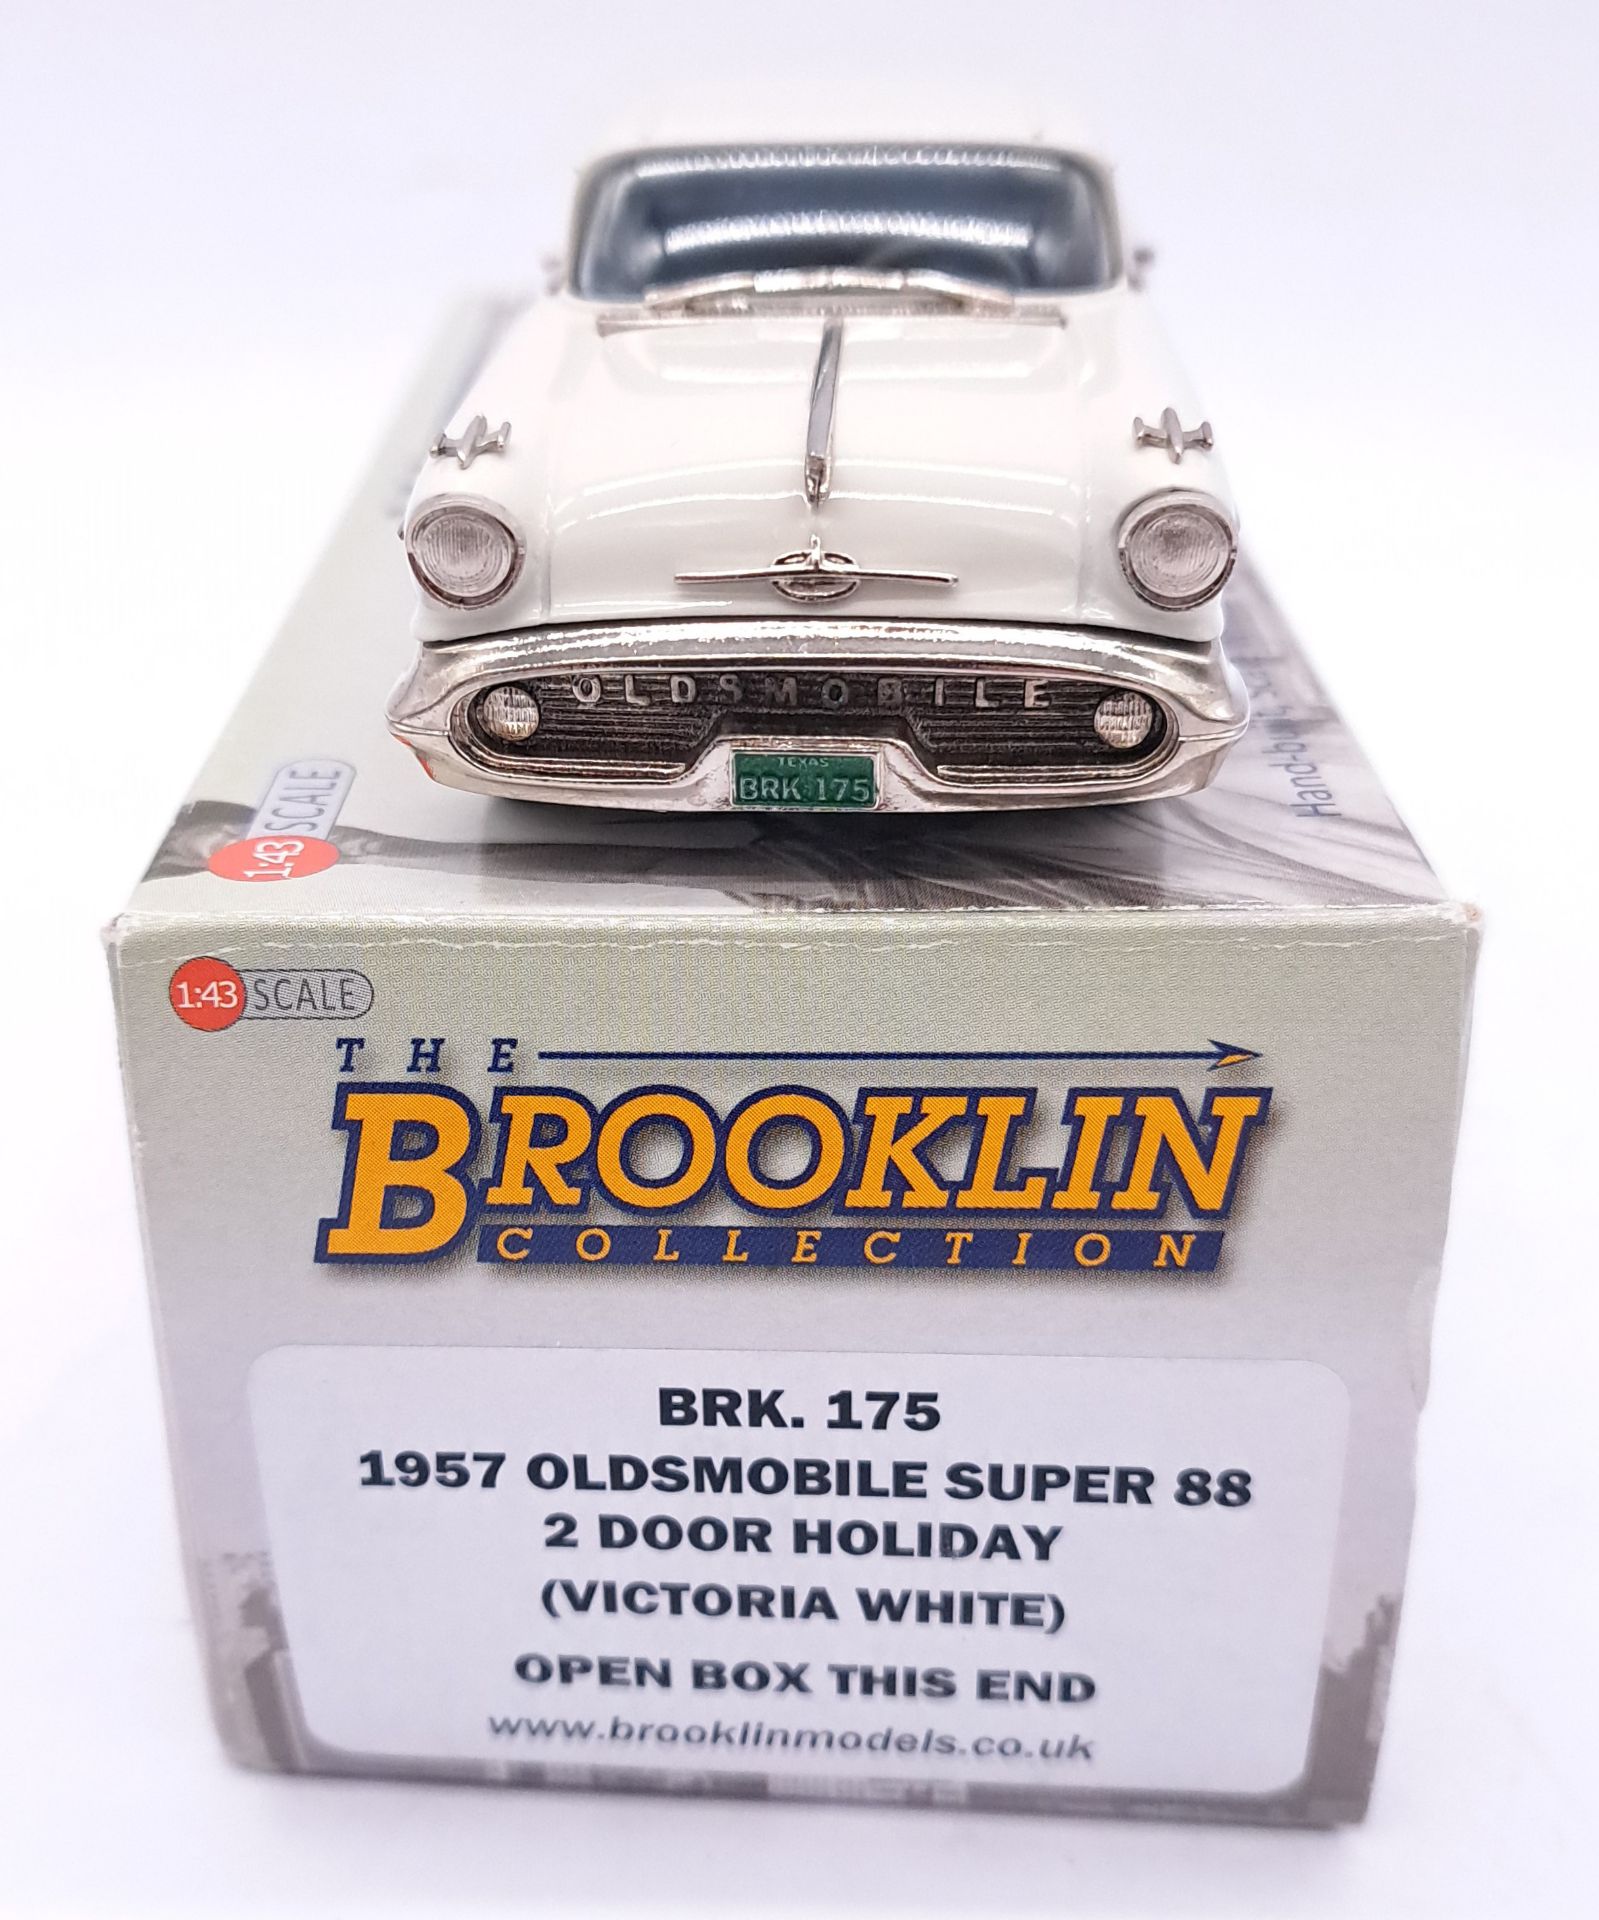 Brooklin Models a boxed 1:43 scale BRK.175 - Image 2 of 5